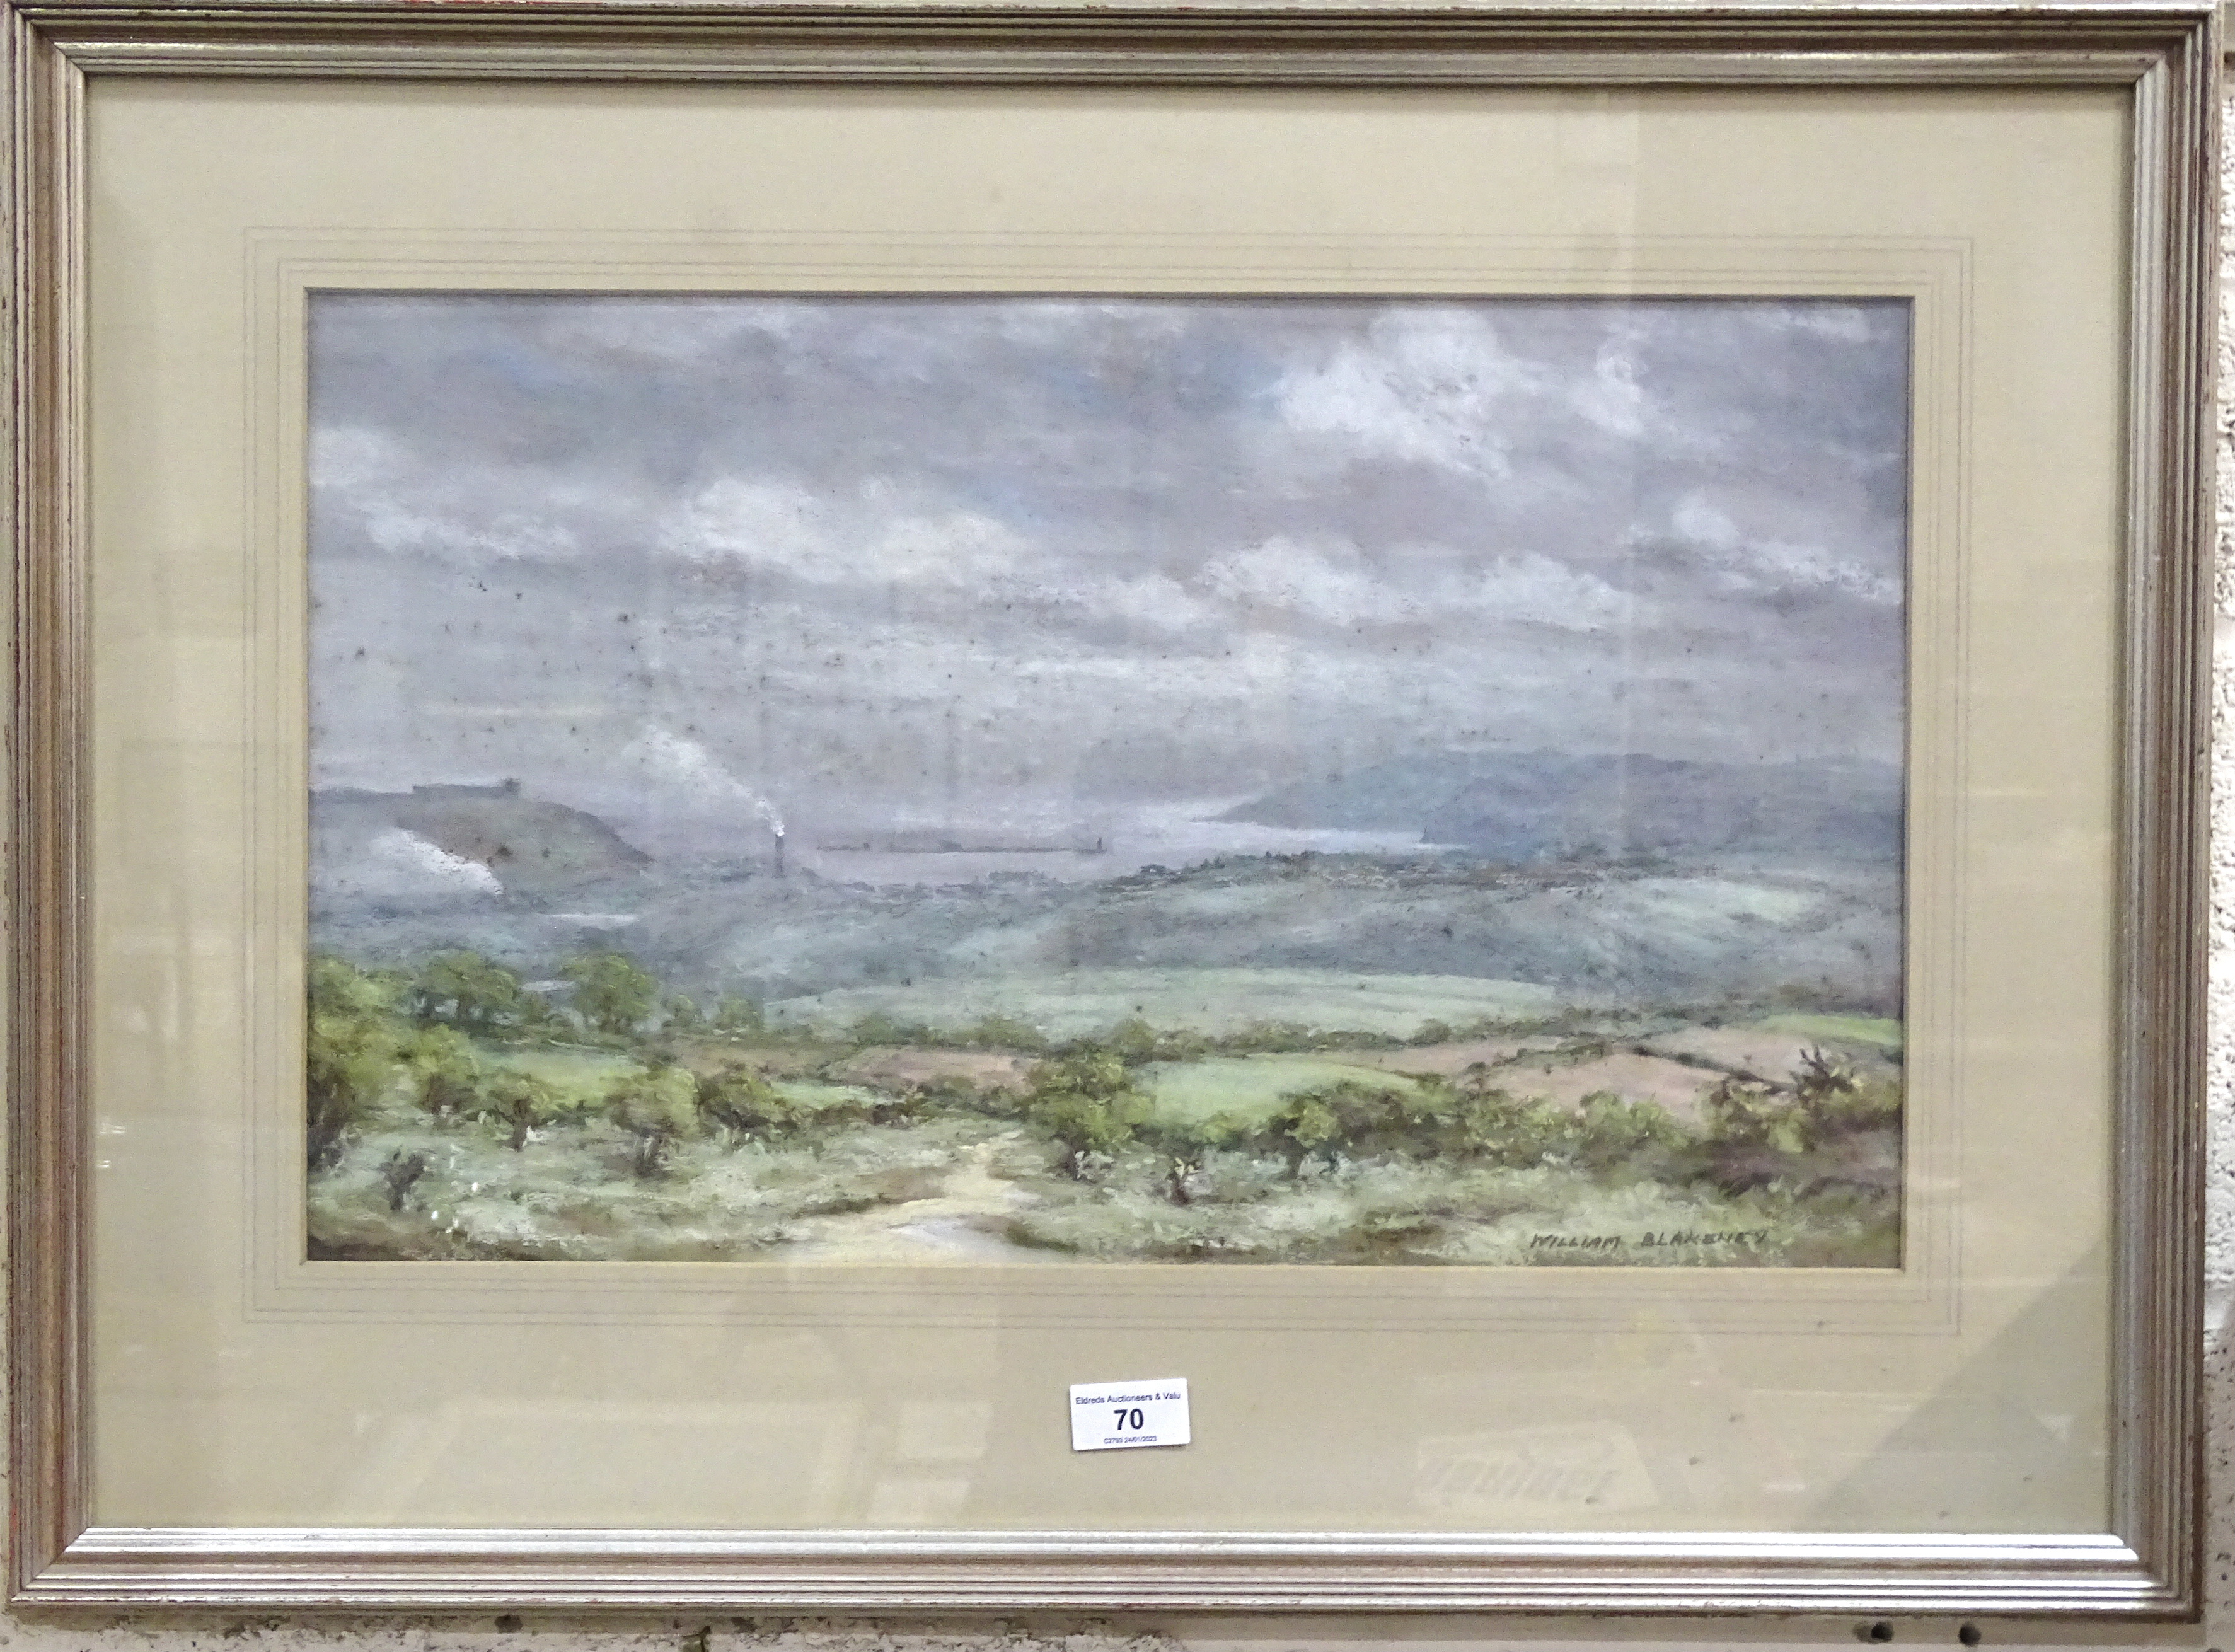 William Blakeney (20th century), 'Rain from The West', (View from Wotter to Plymouth Sound), a